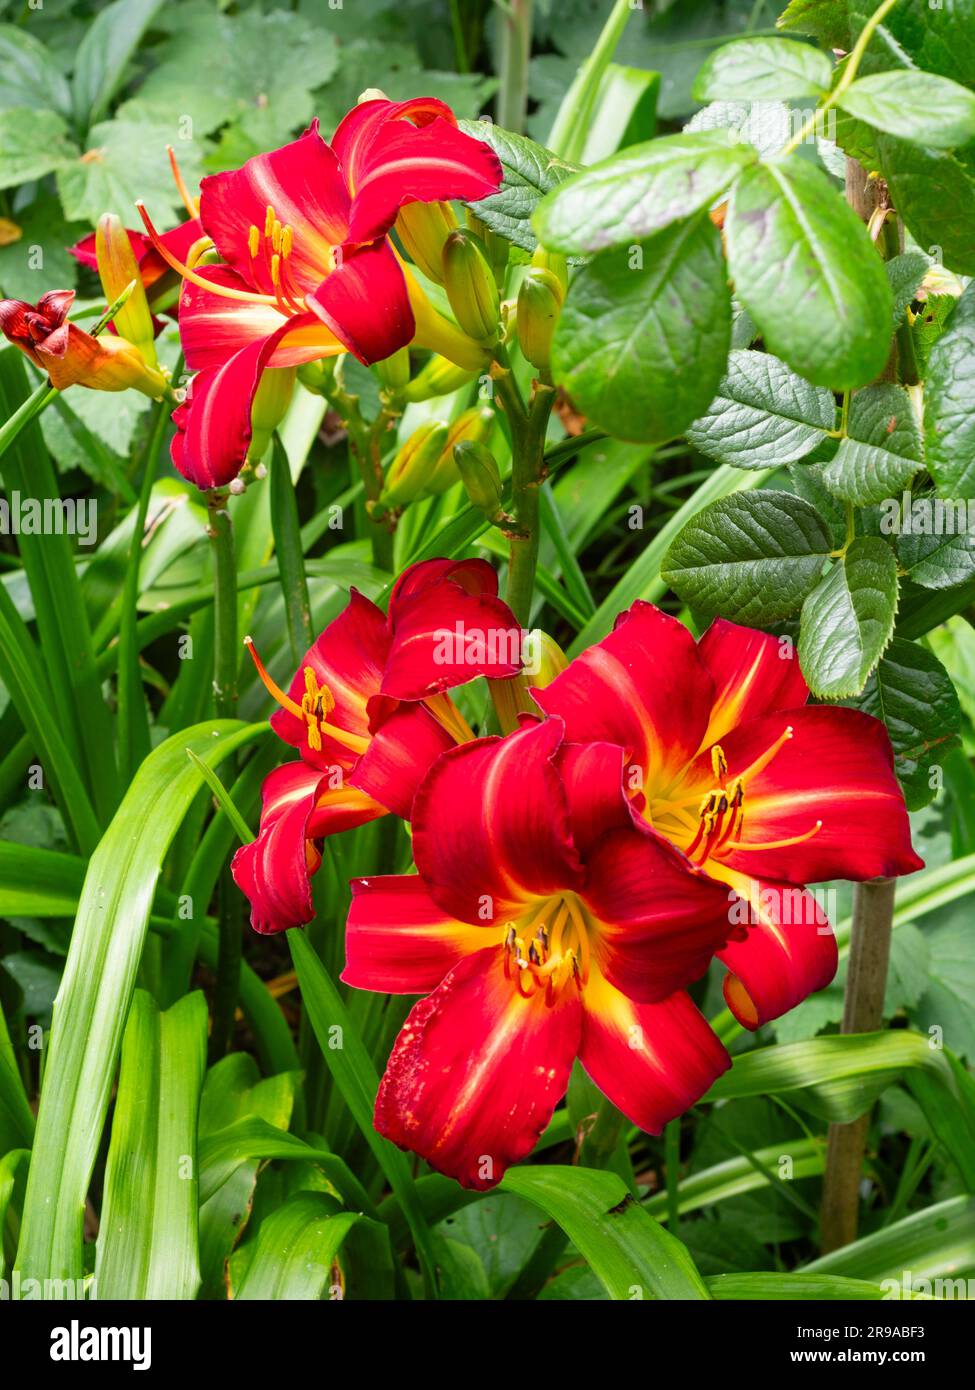 Bright summer flowers of the hardy perennial day lily, Hemerocallis 'Berlin Red' Stock Photo